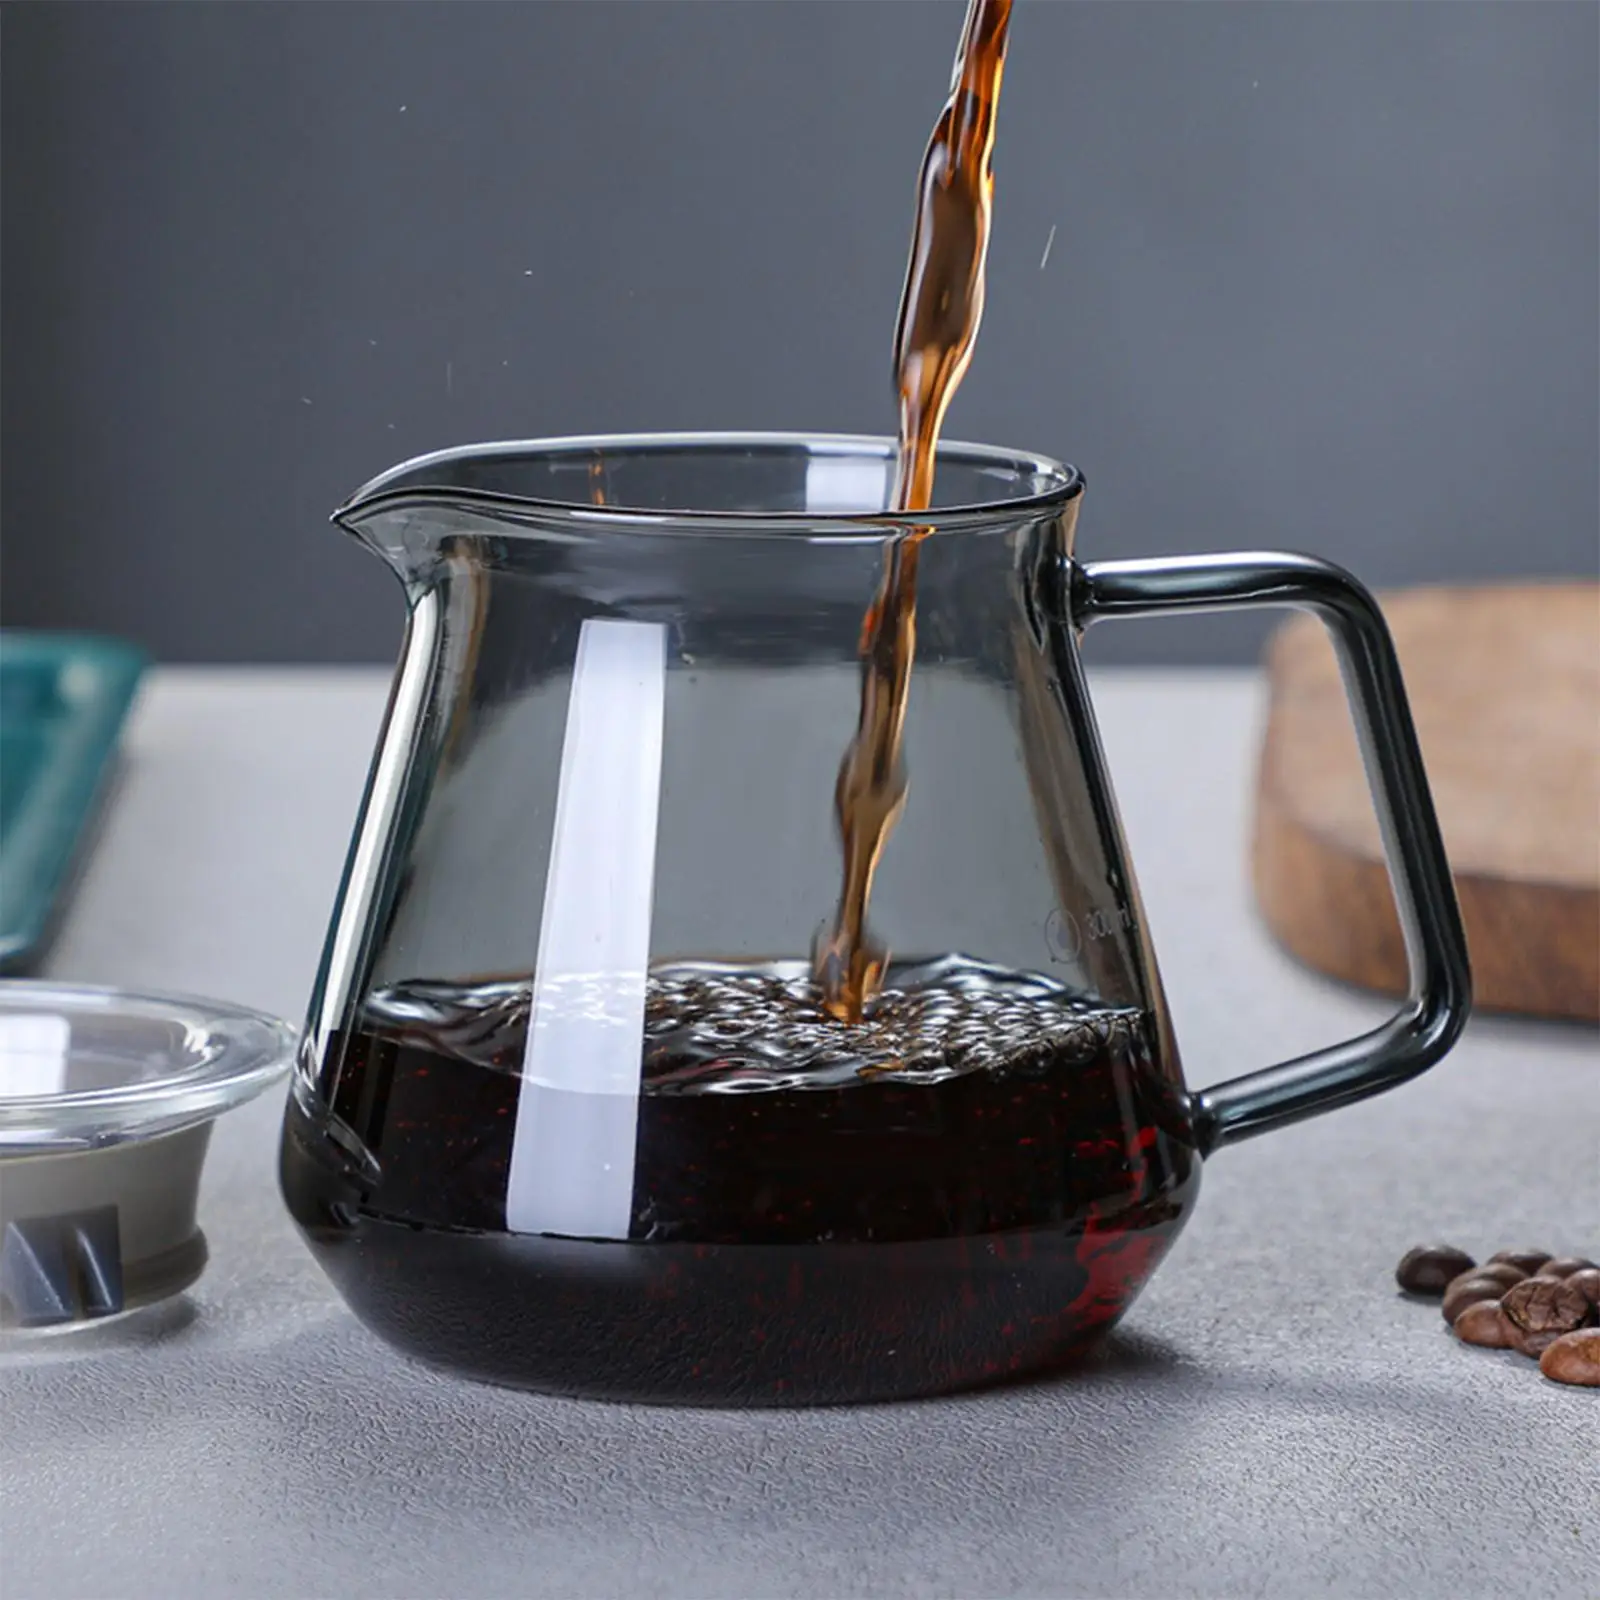 Pour Over Coffee Pot Carafe Coffee Brewer Coffee Dripper for